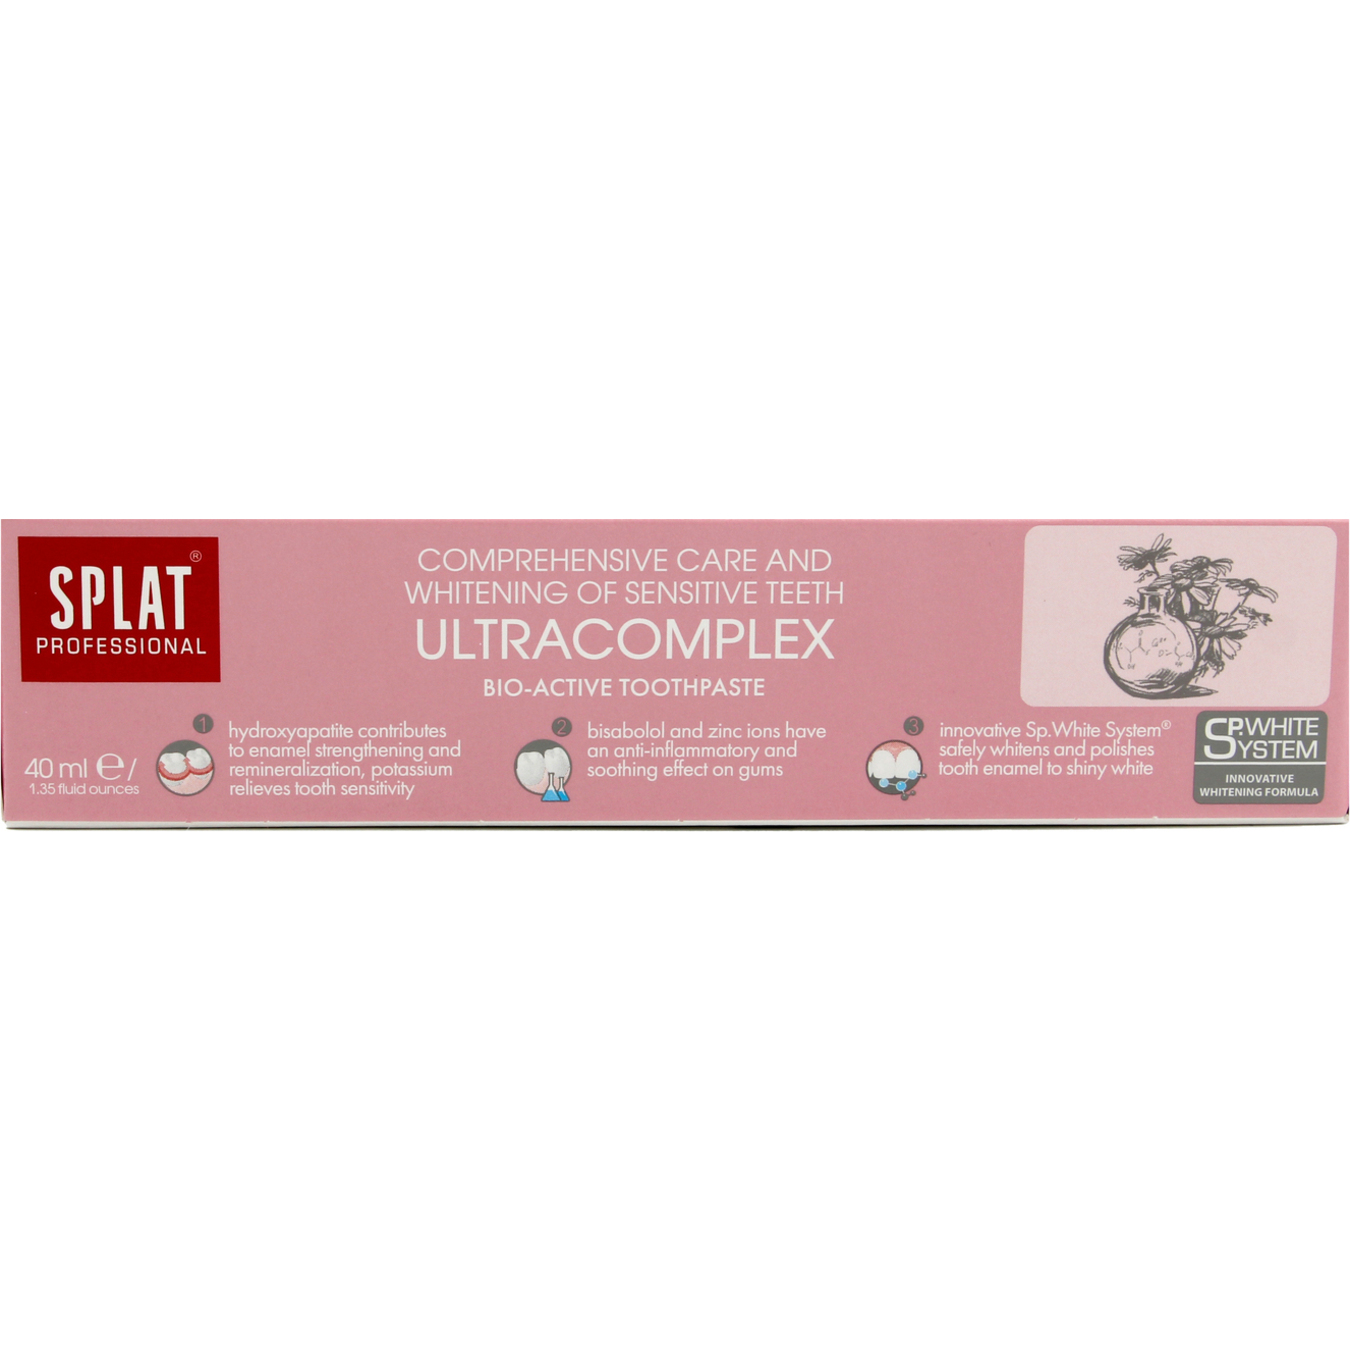 Splat Professional Ultracomplex Toothpaste 40ml 5